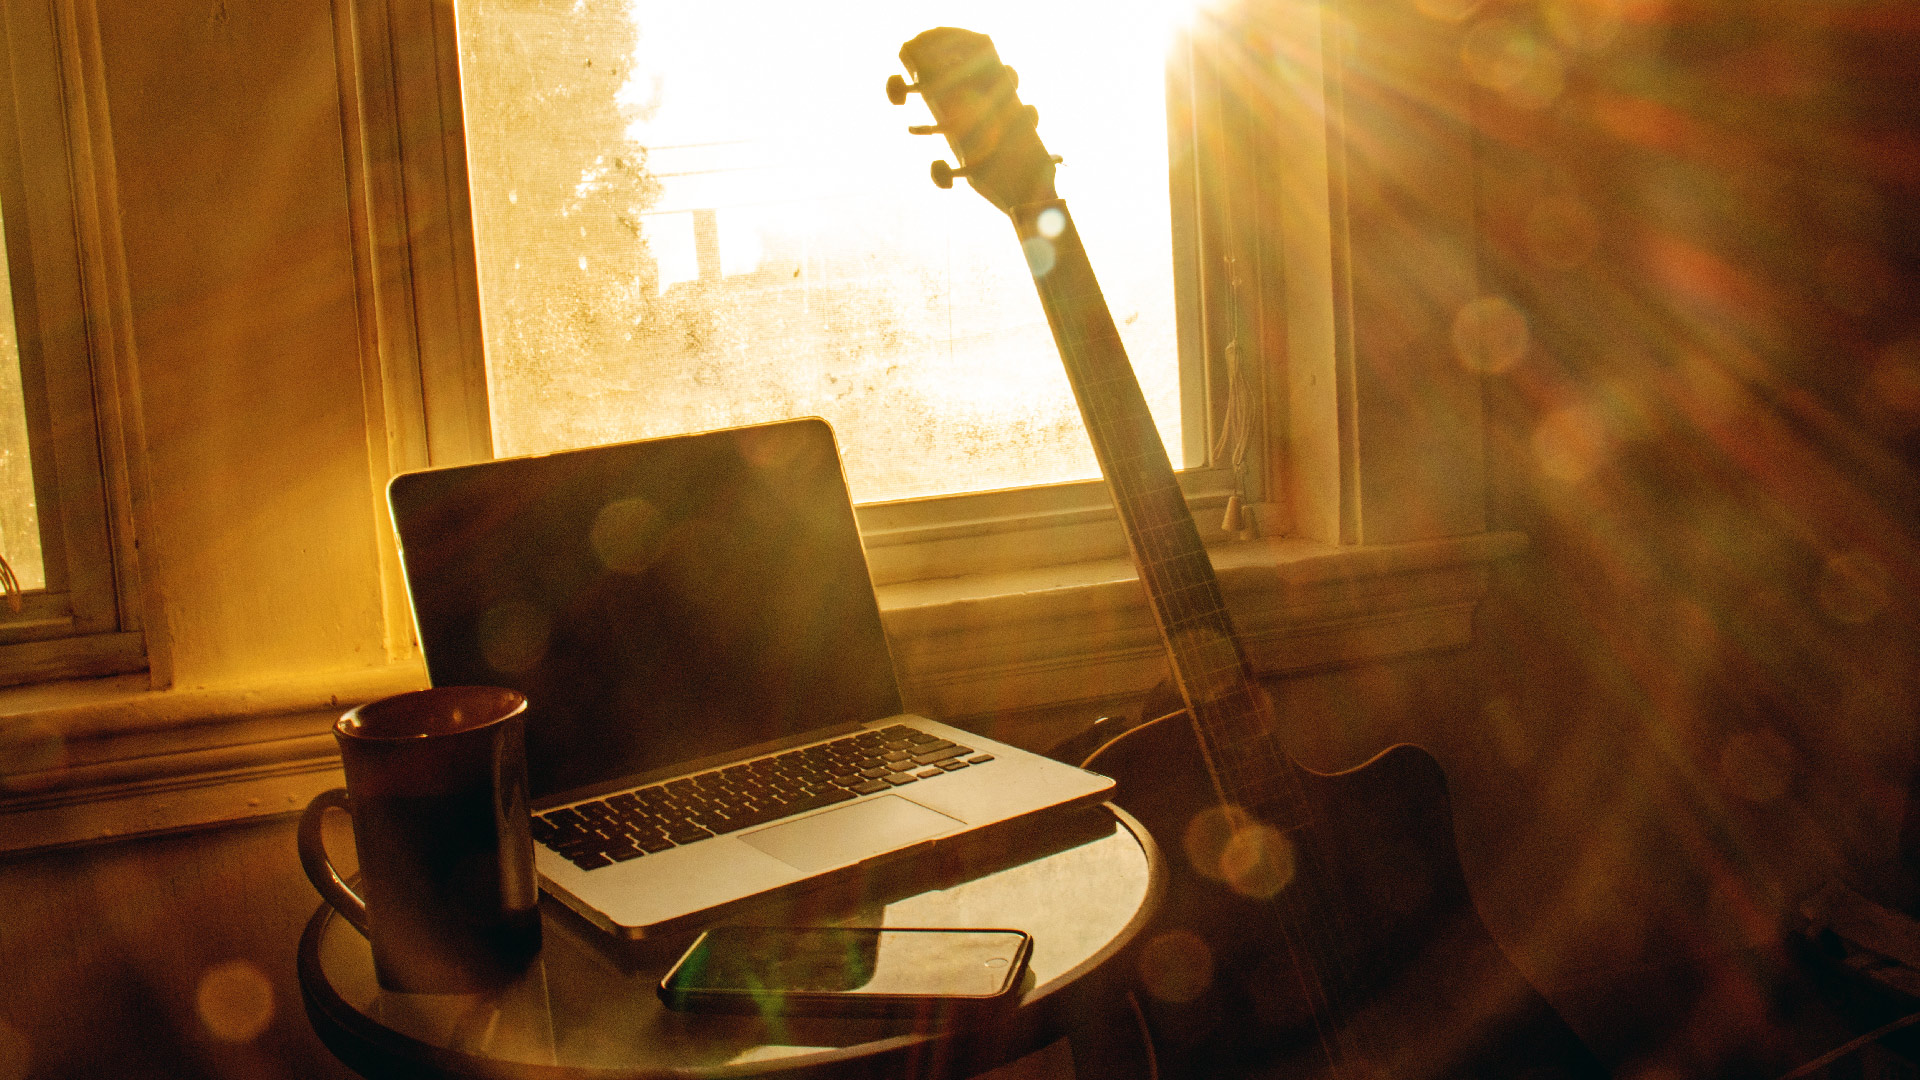 Morning table scene with smartphone, laptop, coffee, and guitar